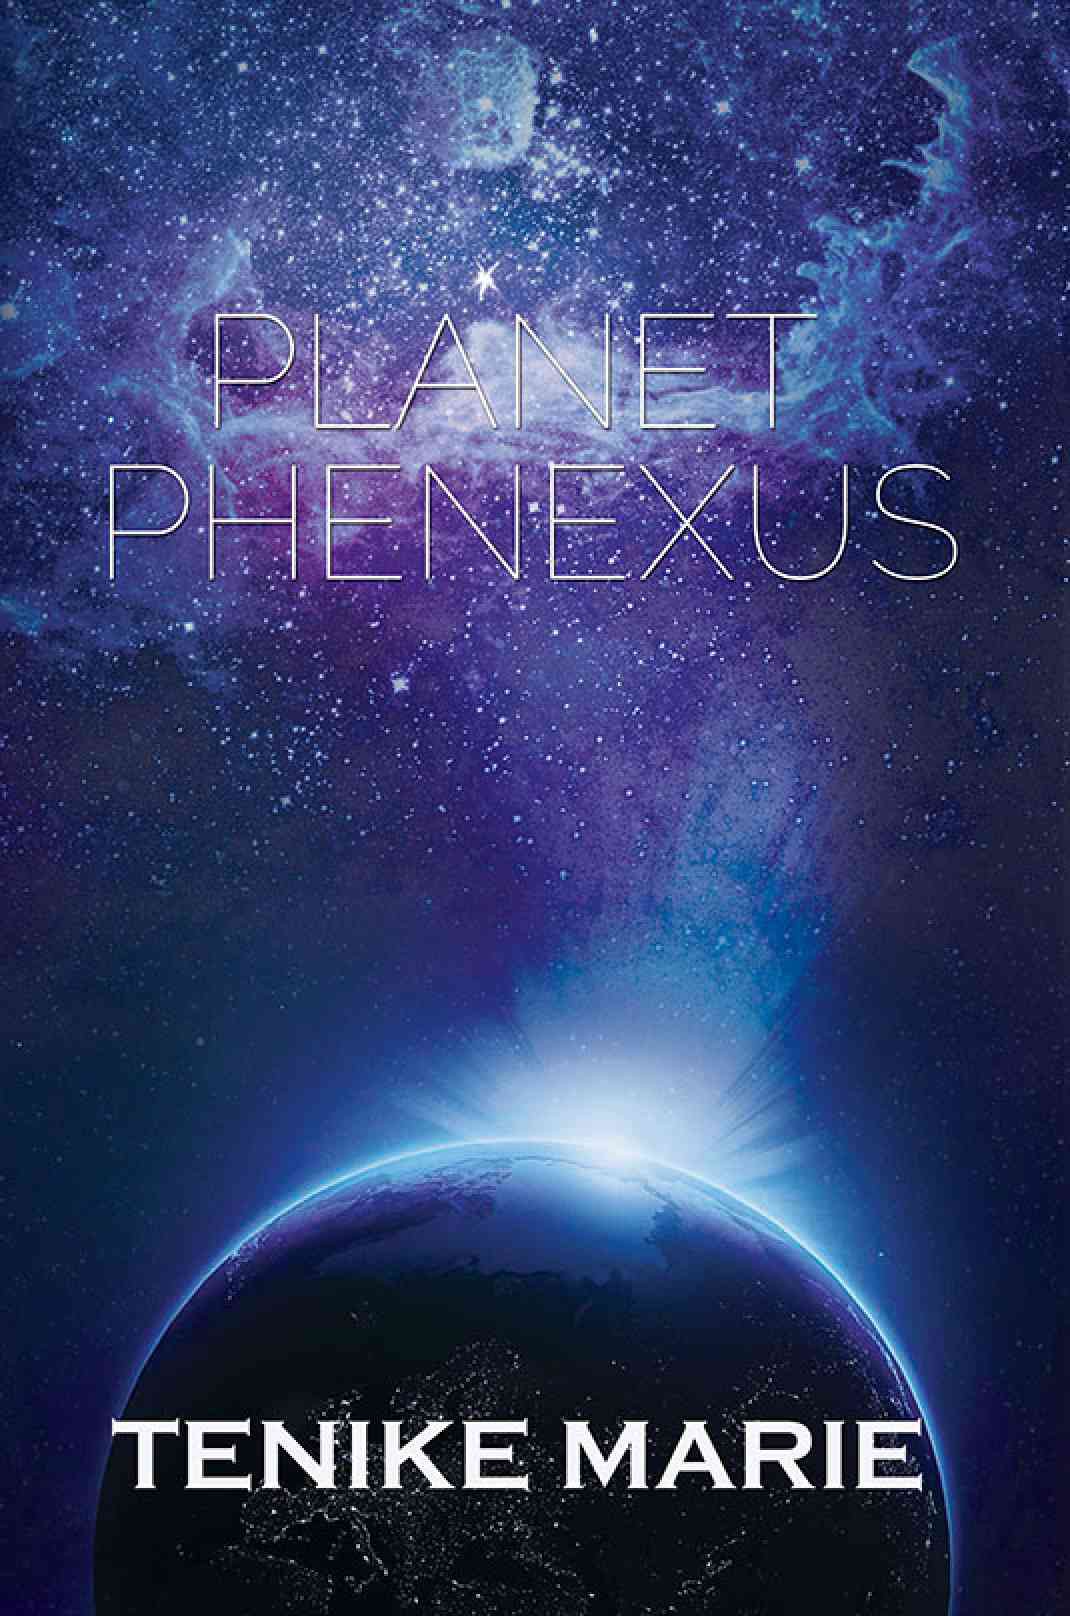 ‘Planet Phenexus’ is an enjoyable read for everyone